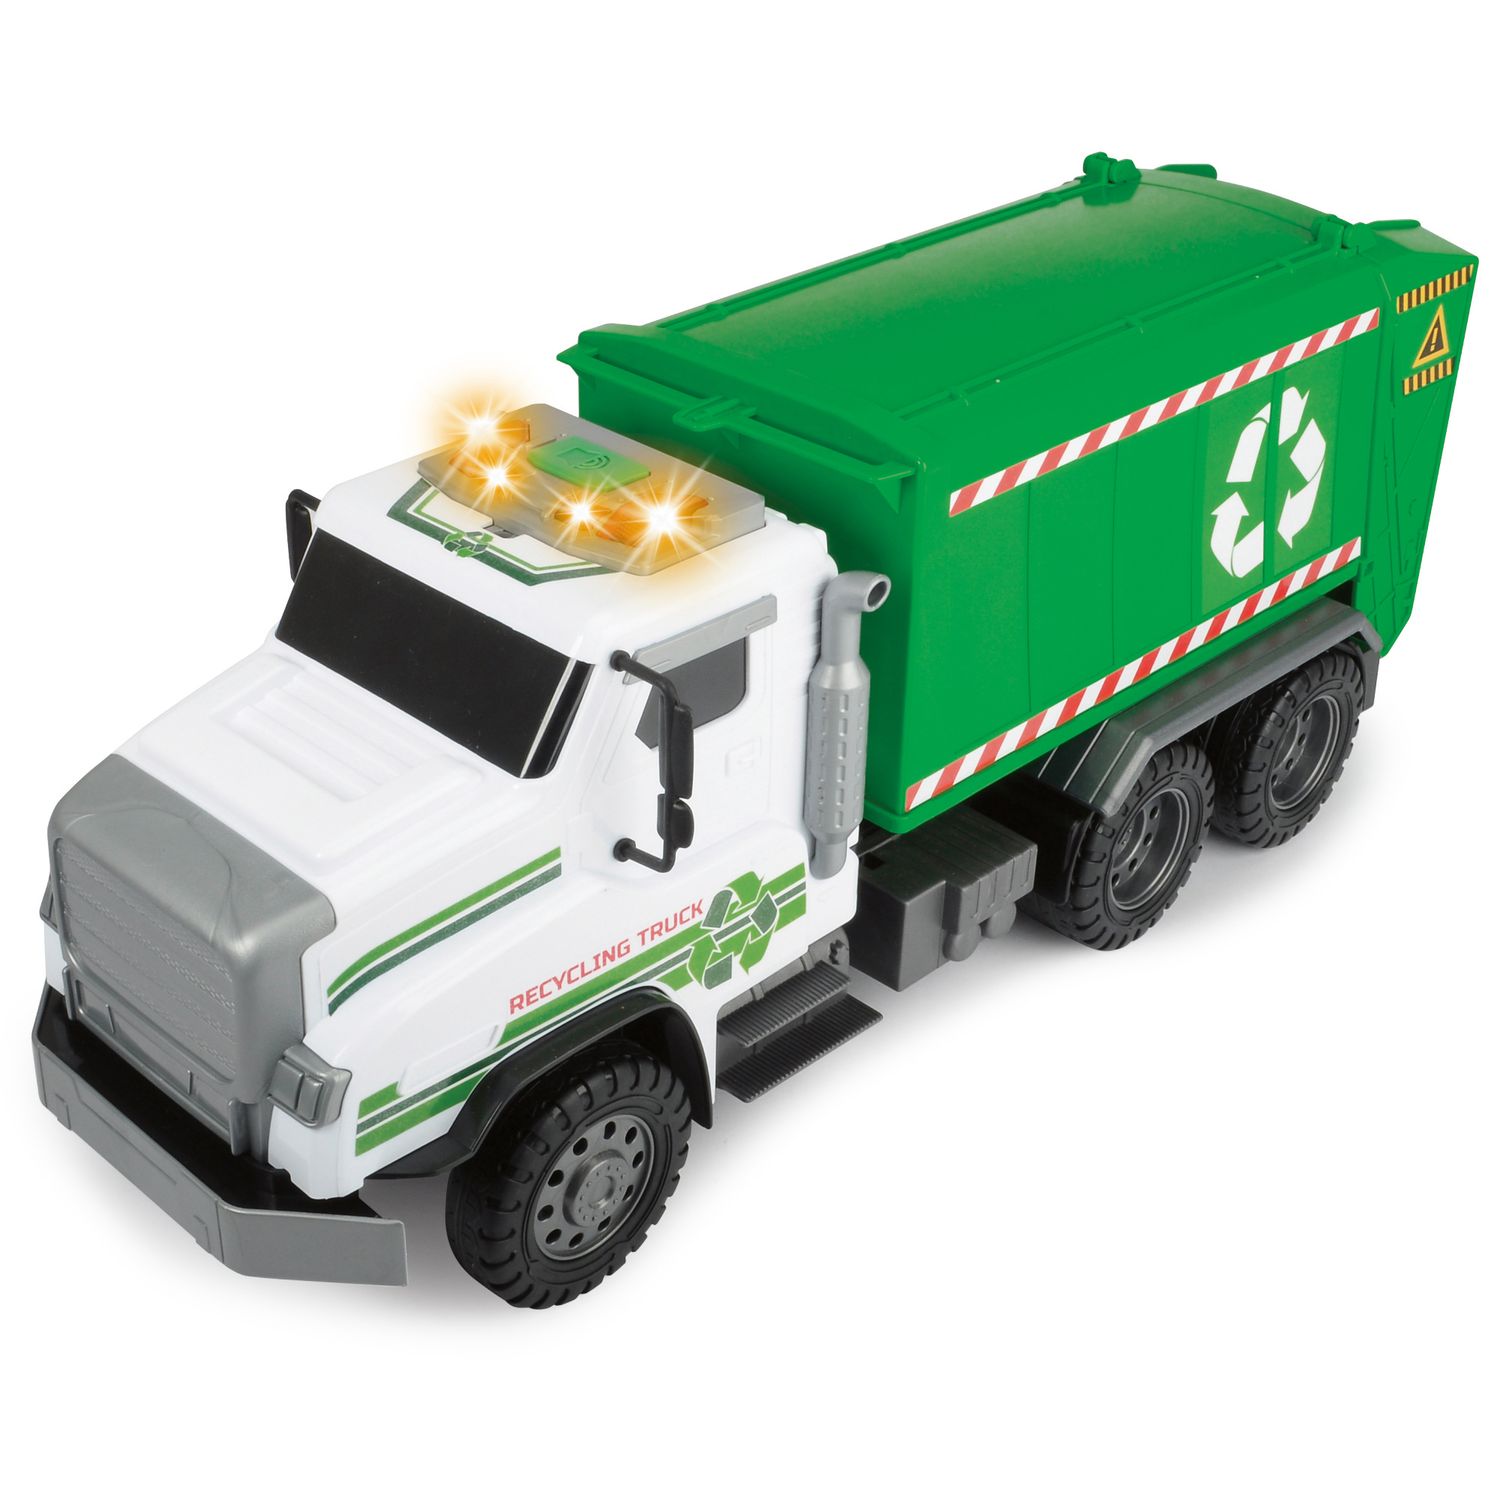 dickie toys recycling truck